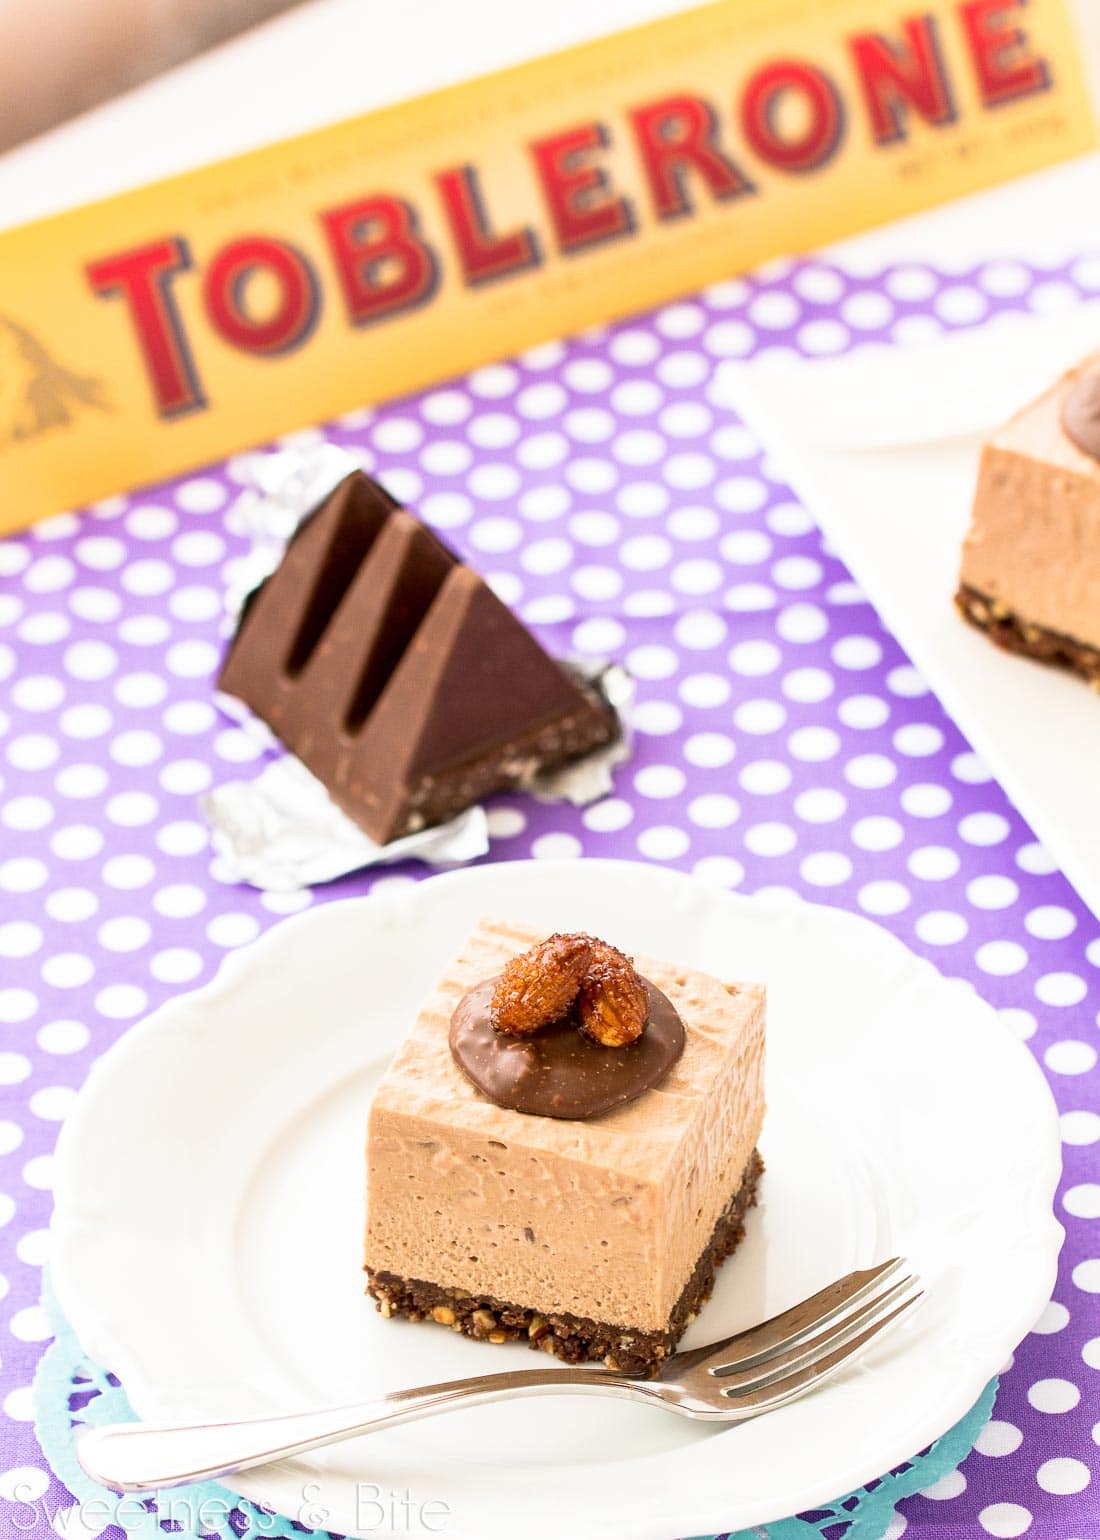 A piece of cheesecake on a white plate, with a block of Toblerone in the background.